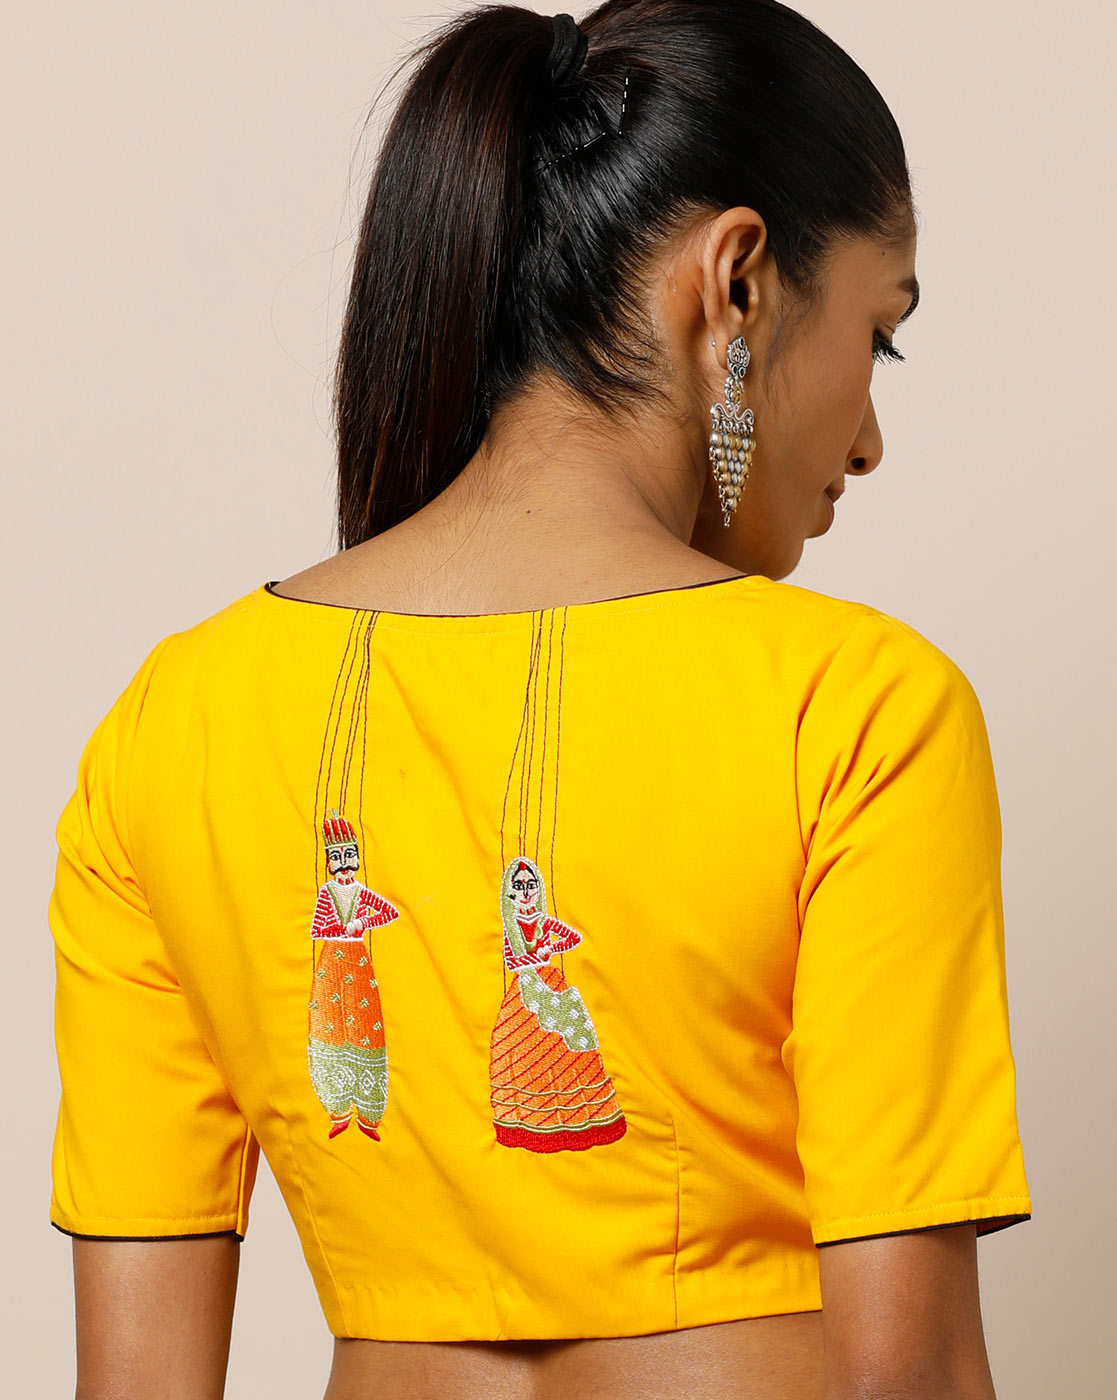 blouse-back-with-embroidery-designs-2019 (20)